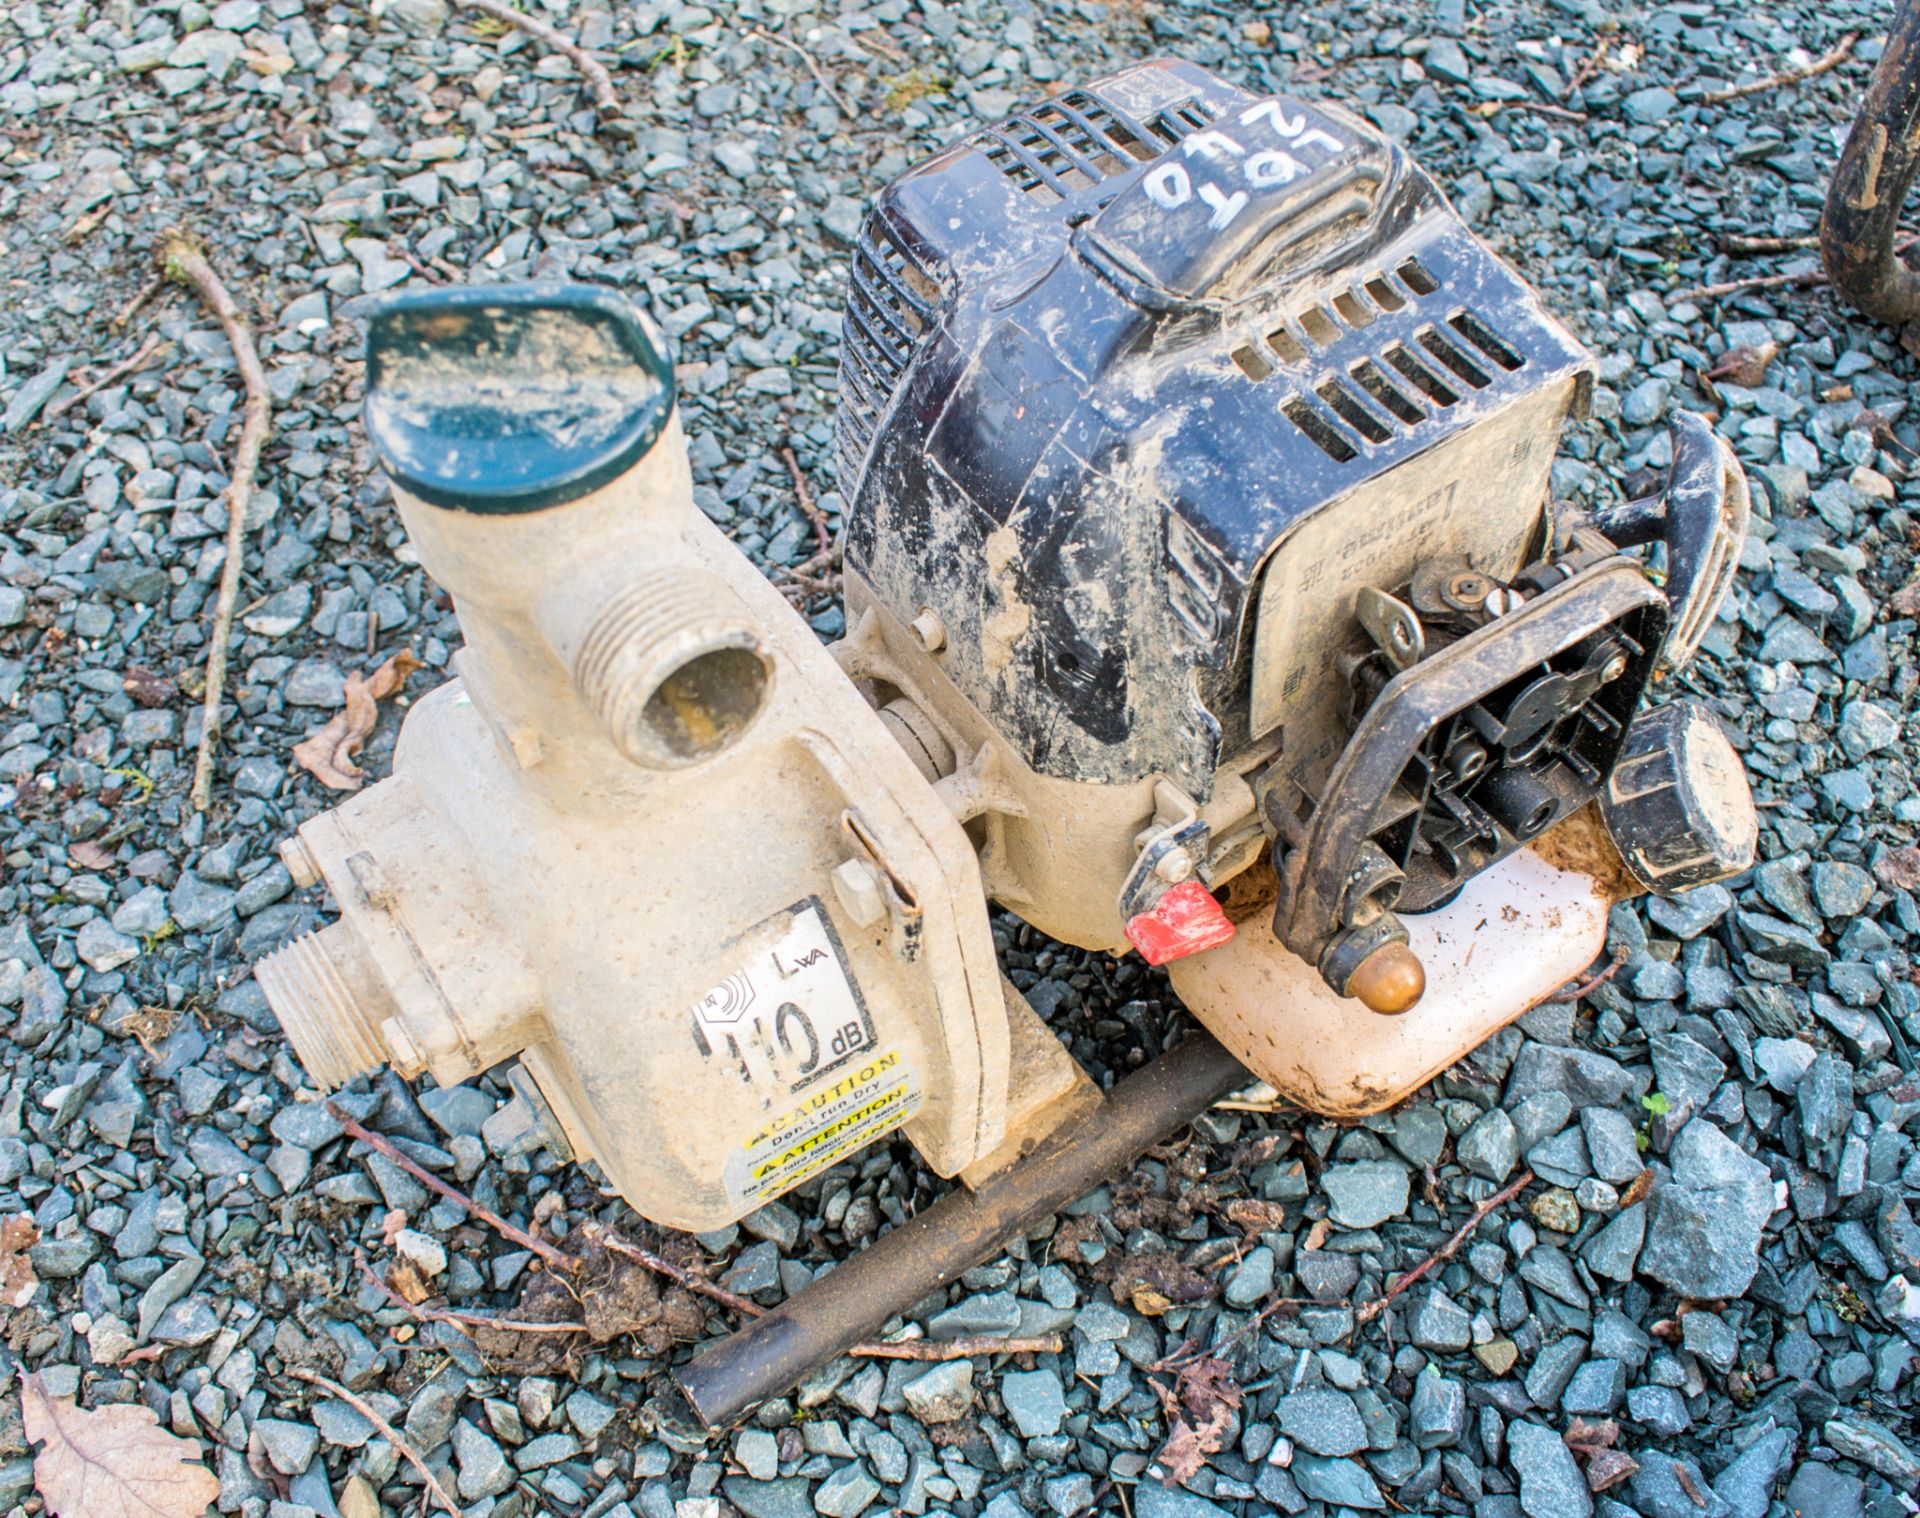 Petrol driven 1 inch water pump A836474 - Image 2 of 2